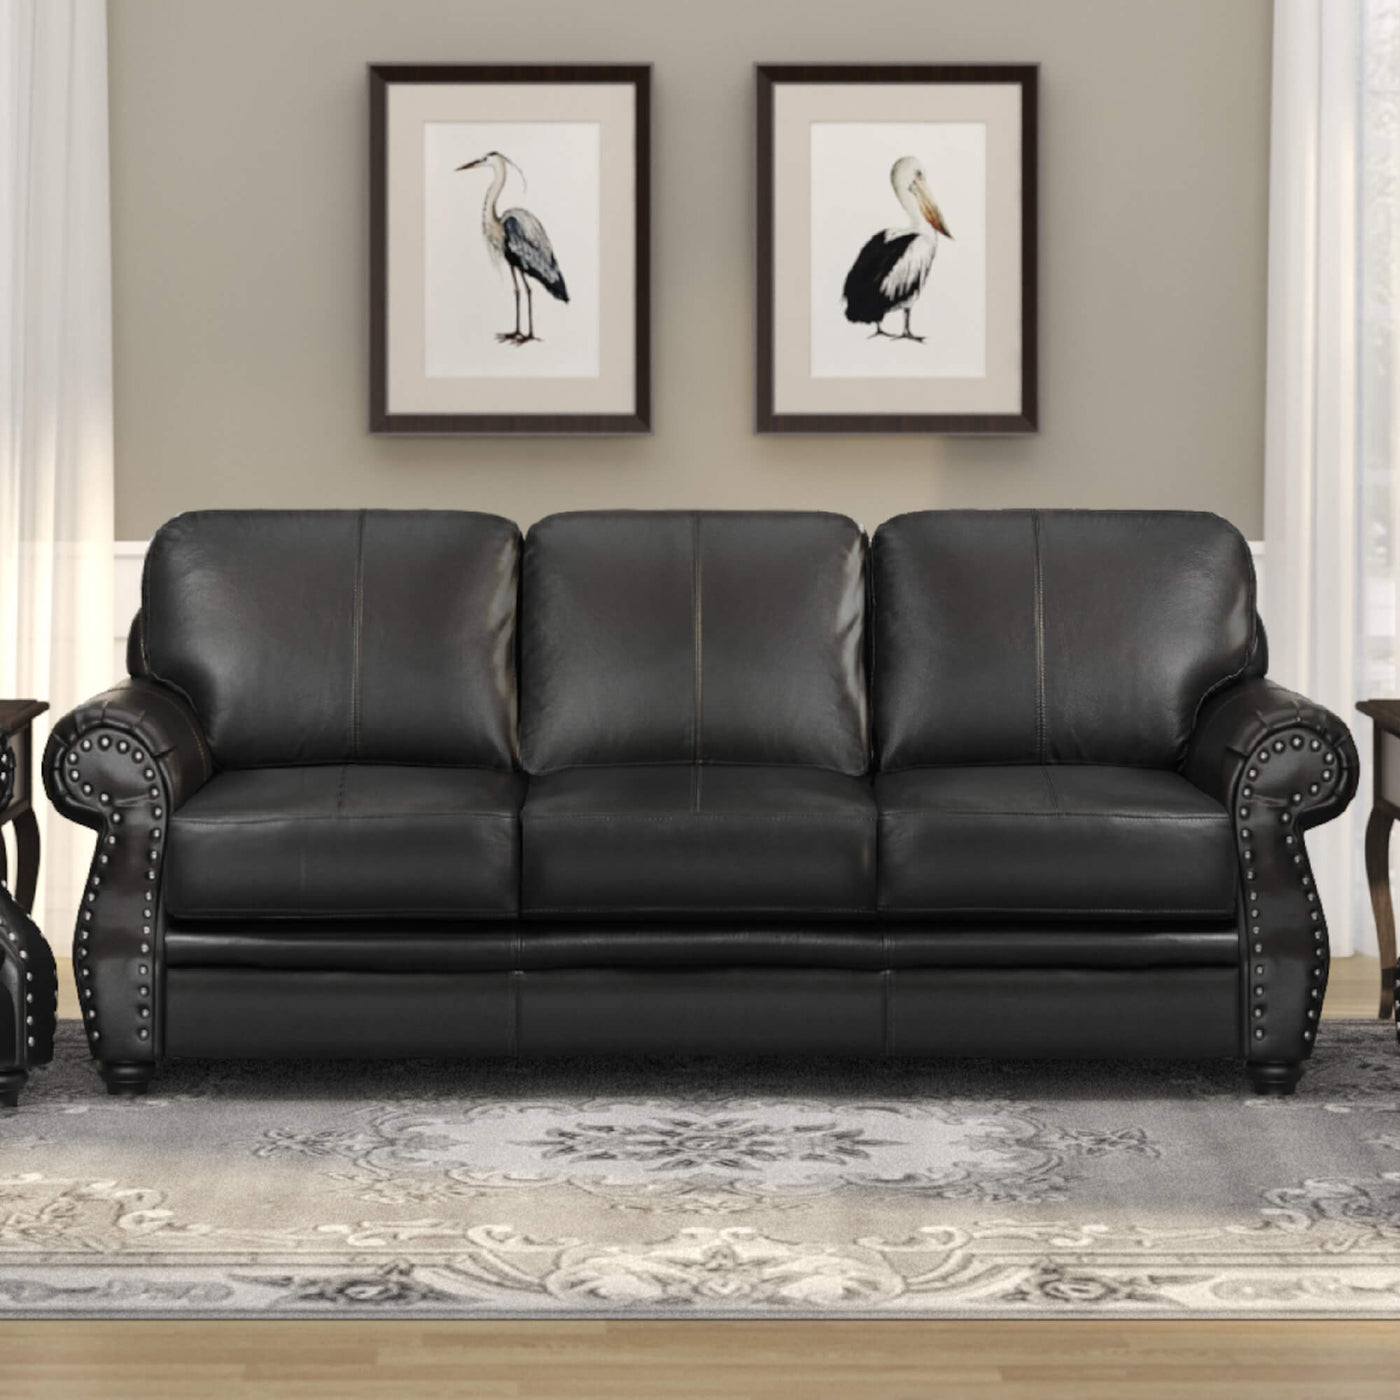 Sunset Trading Charleston 86 Wide Top Grain Leather Sofa Black 3 Seater Rolled Arm Couch With Nailheads Su Cr2130 80 300lf Micahome Com